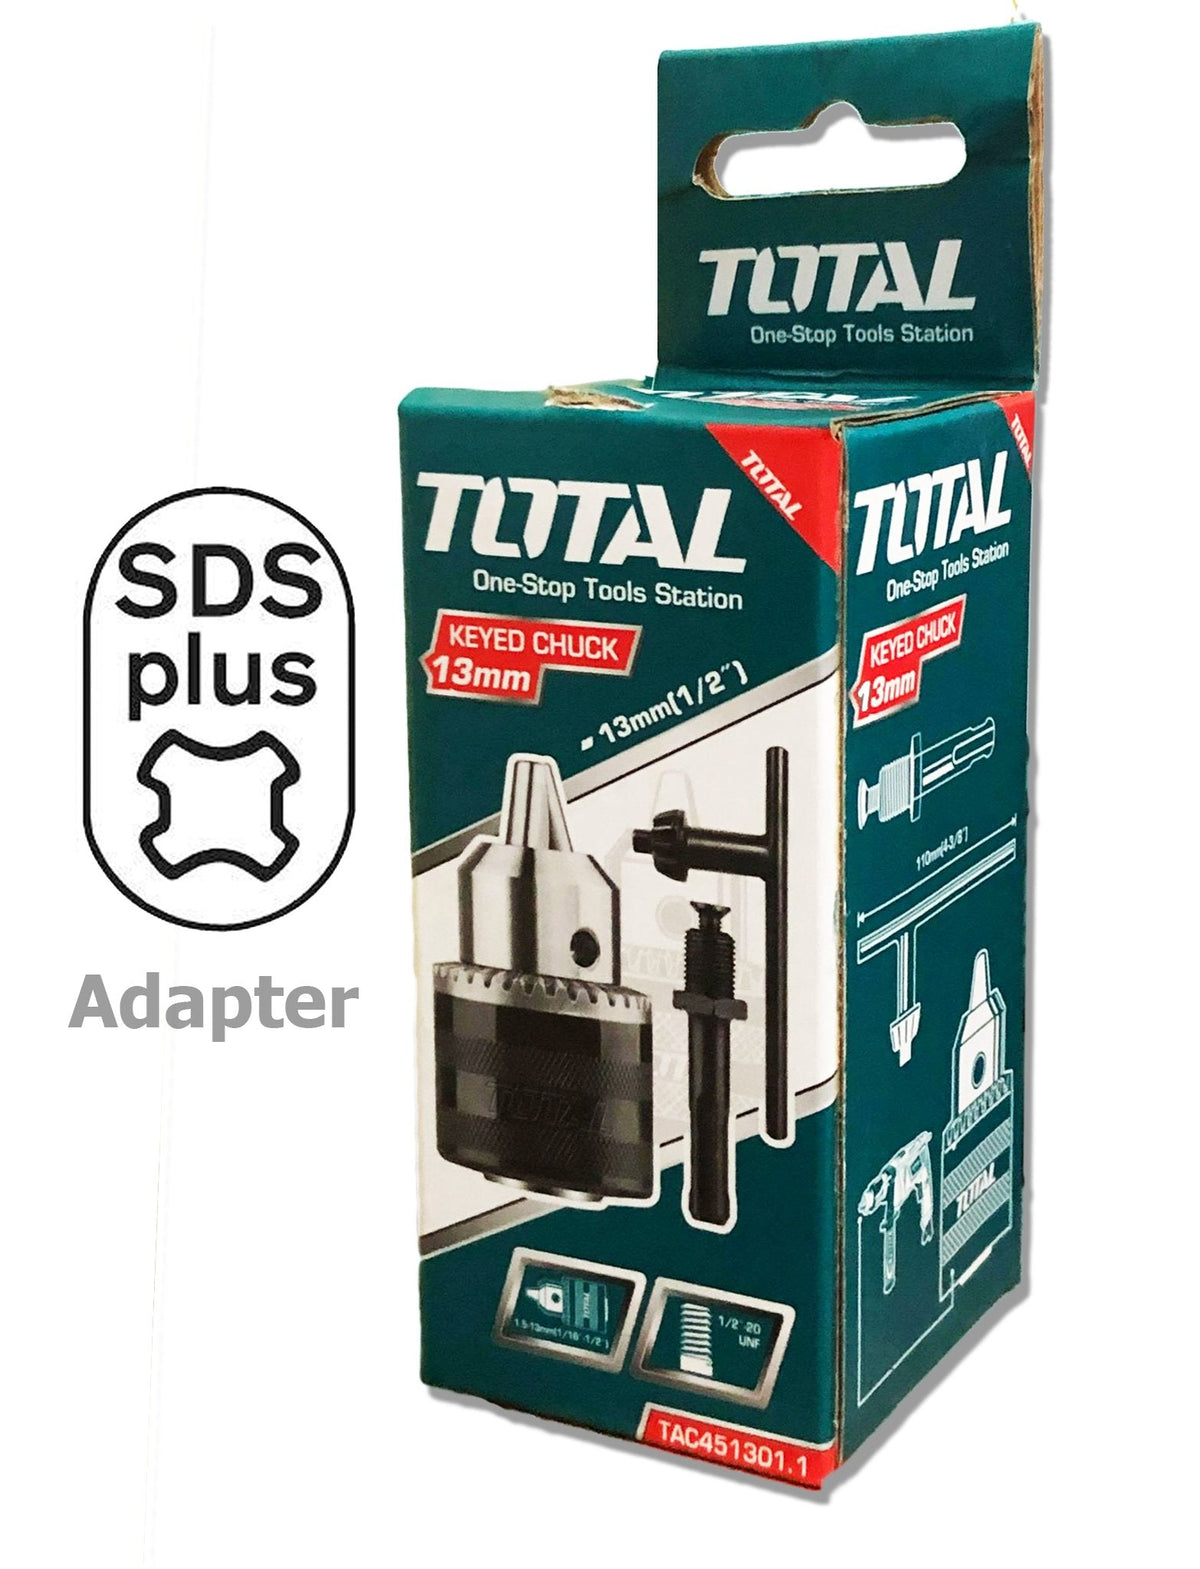 Total TAC451301.1 SDS-plus Adapter with Drill Chuck - ToolsSavvy.ph